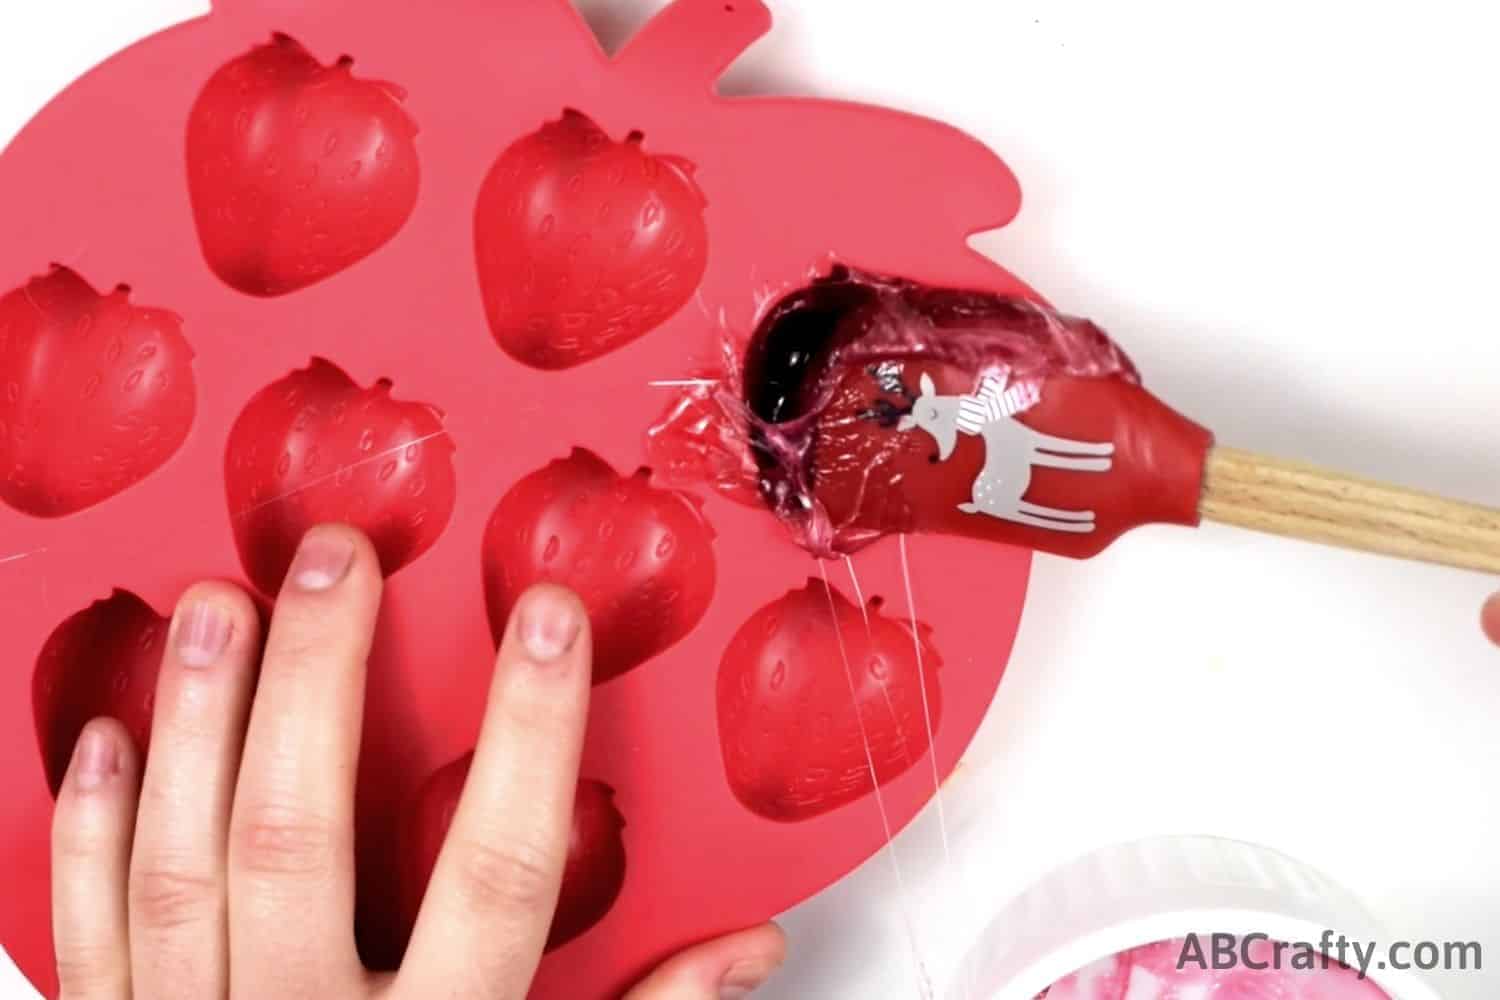 filling the top of the strawberry silicone mold with melted gummy candy with a spatula